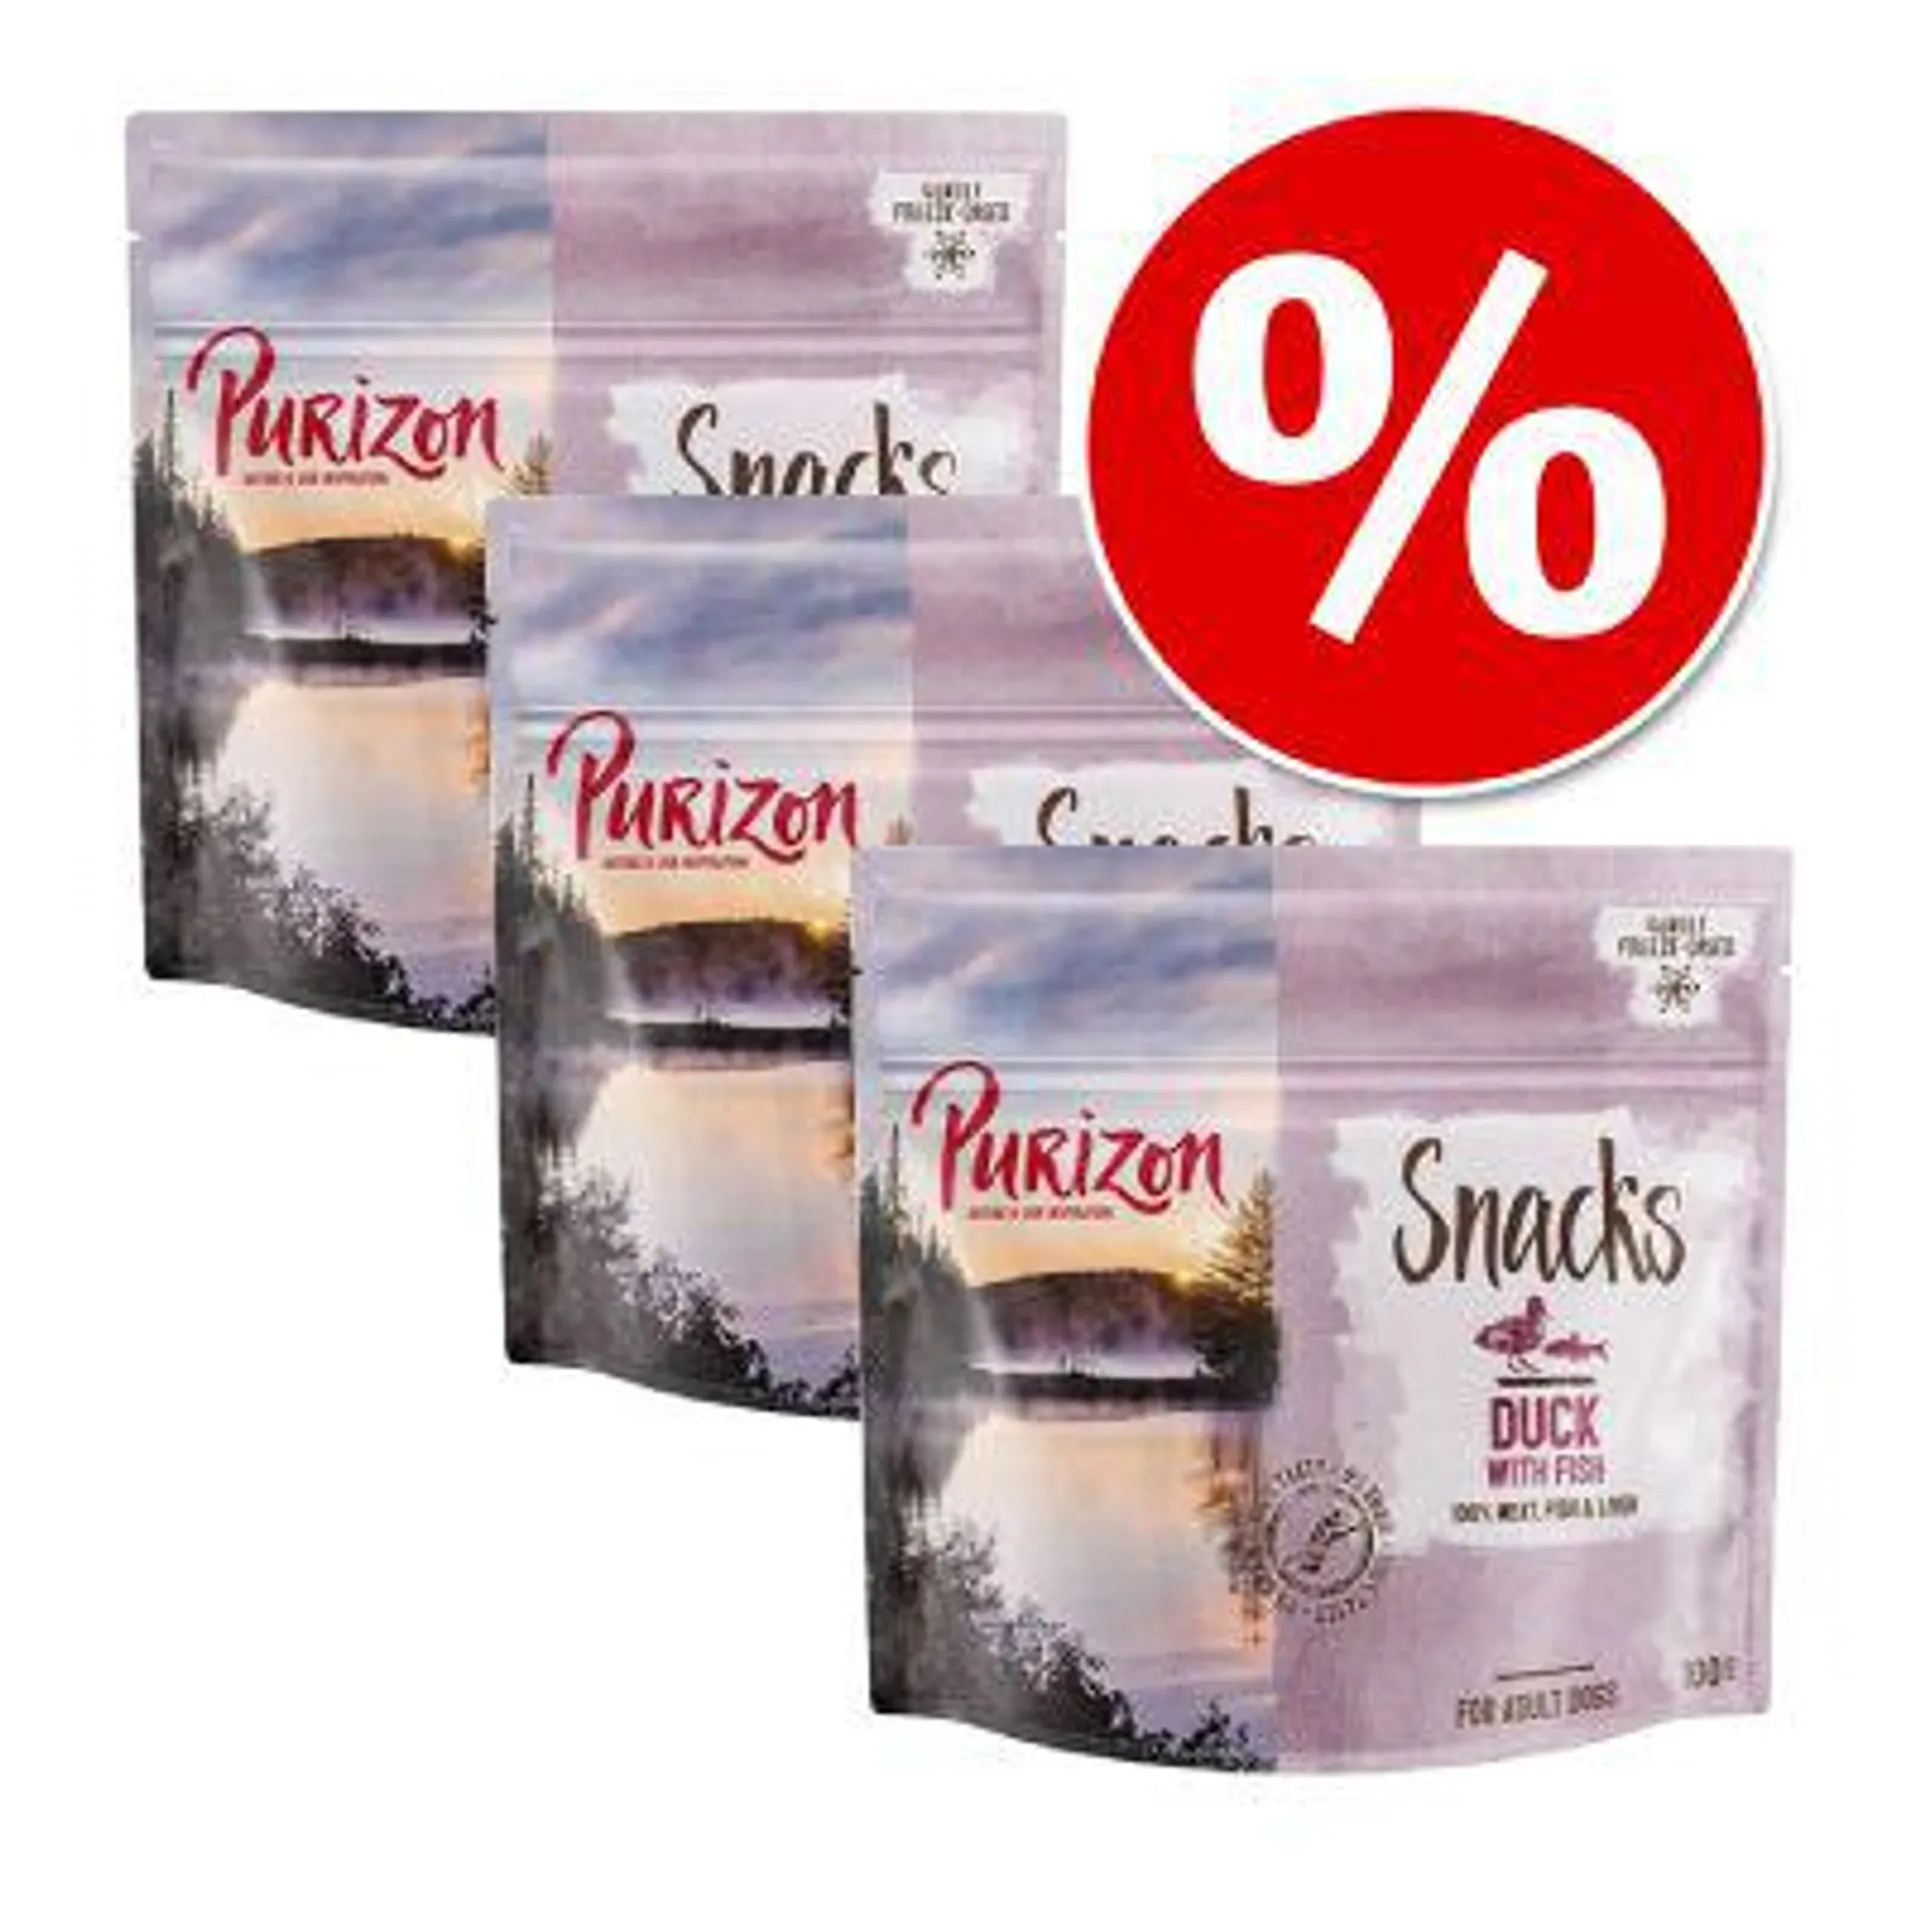 3 x 100g Purizon Grain-Free Duck with Fish Dog Snacks - Special Price!*